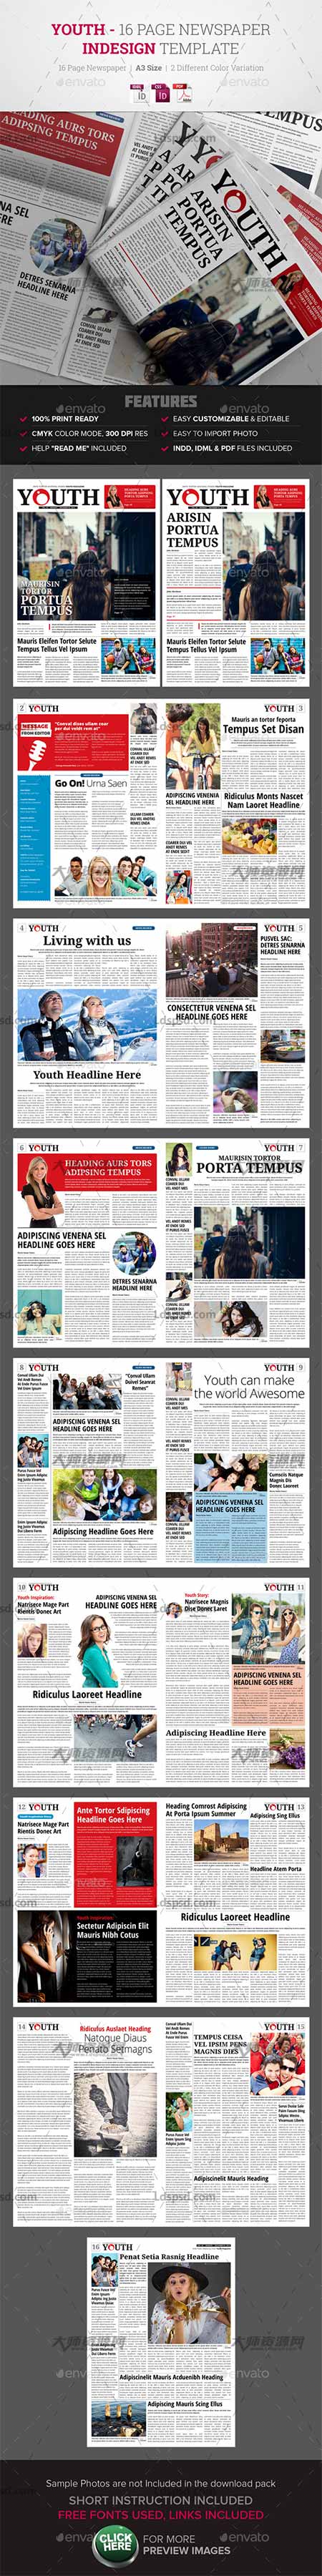 Youth - 16 Page Newspaper Indesign Template,indesign模板－青年时报(通用型/16页)